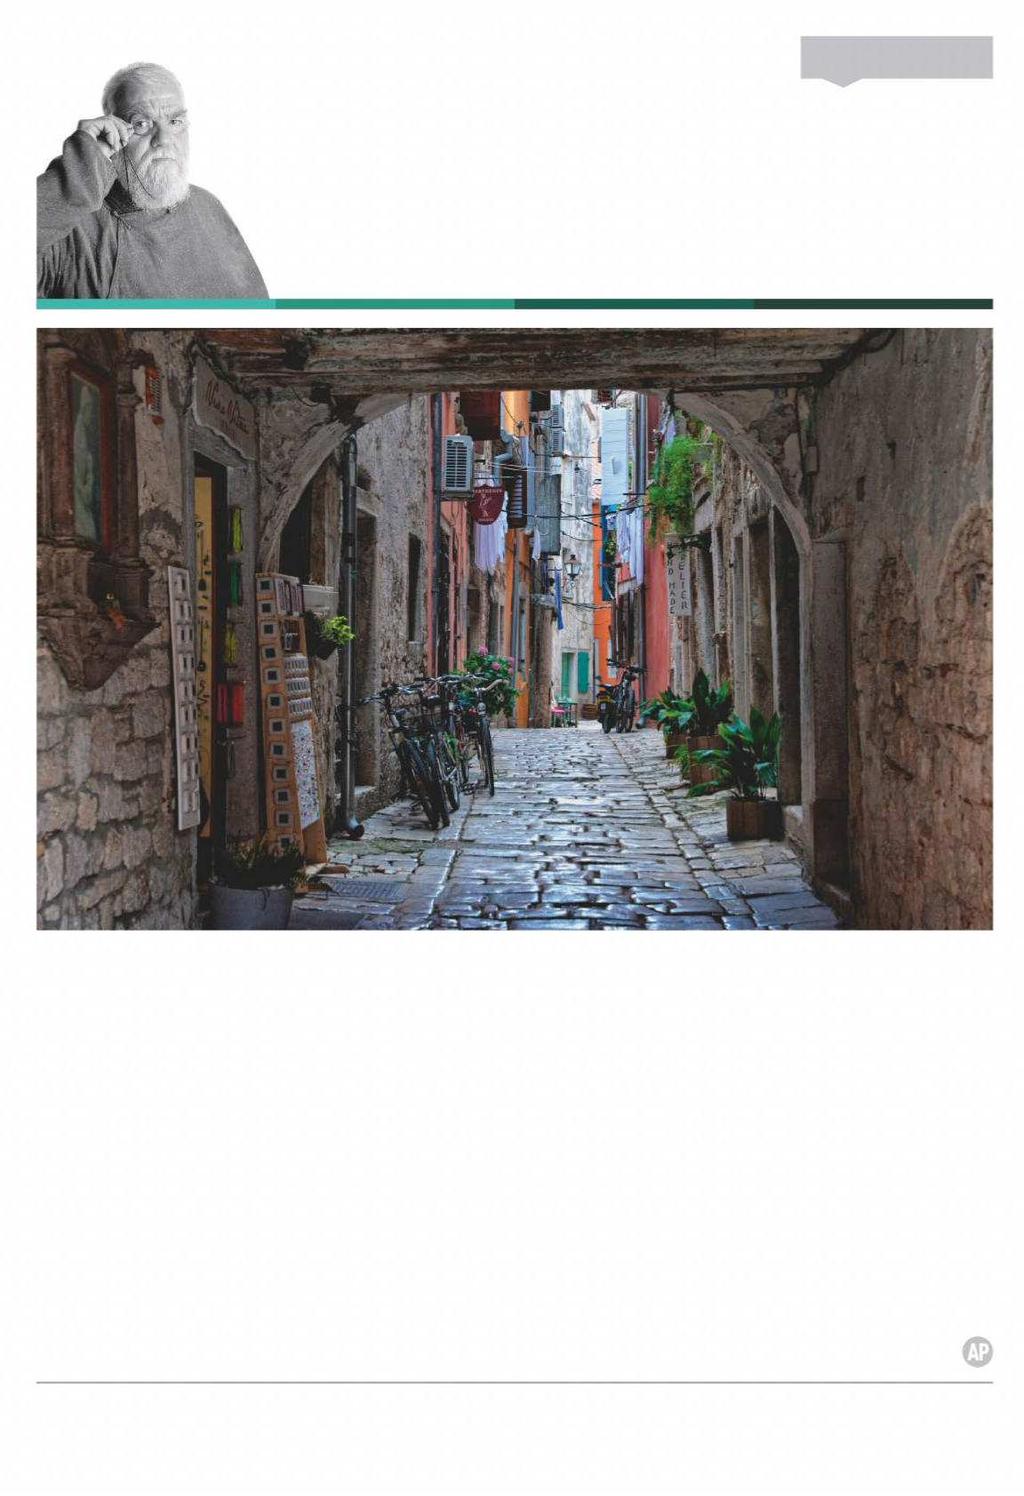 Final Analysis Roger Hicks considers Croatian Rovinj, 2018, by Piotr Slusarczyk Photo Critique PIOTR SLUSARCZYK What are pictures supposed to look like?